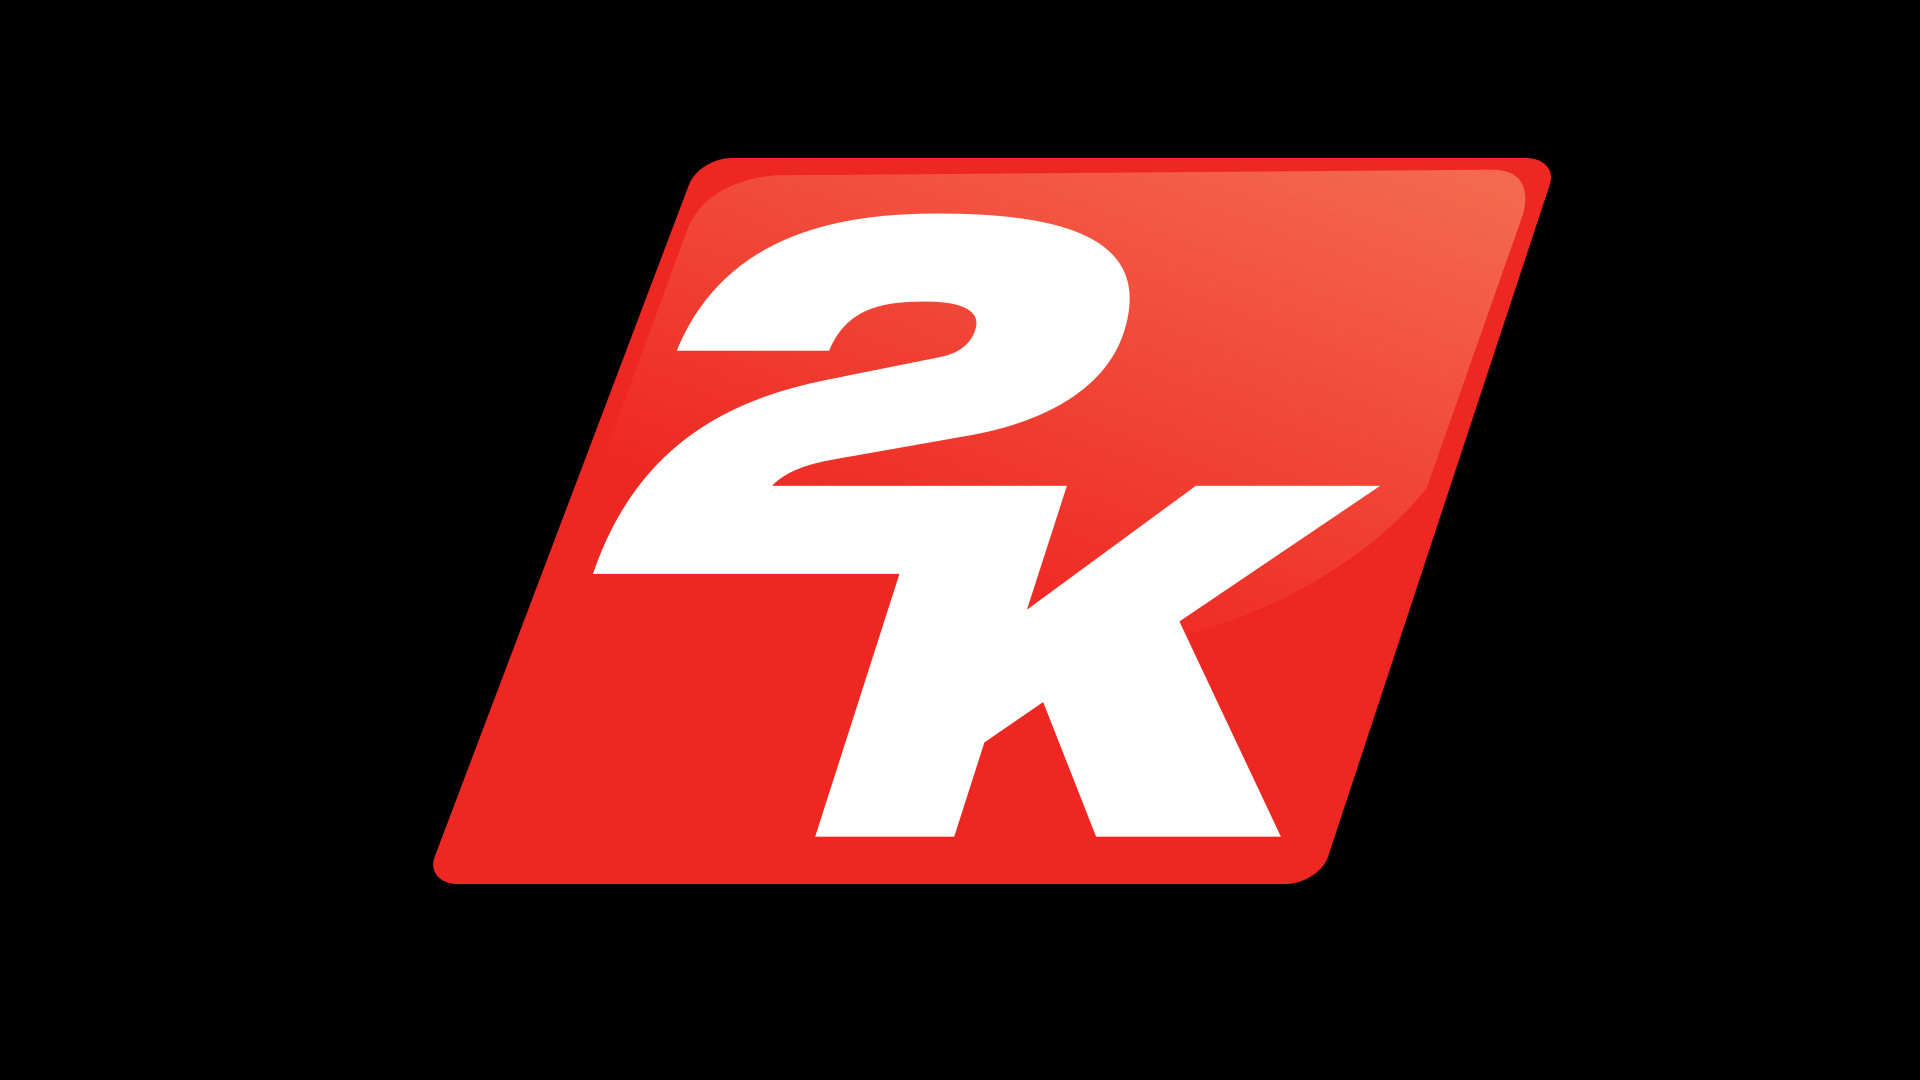 2k-games-will-announce-an-exciting-new-franchise-later-this-month